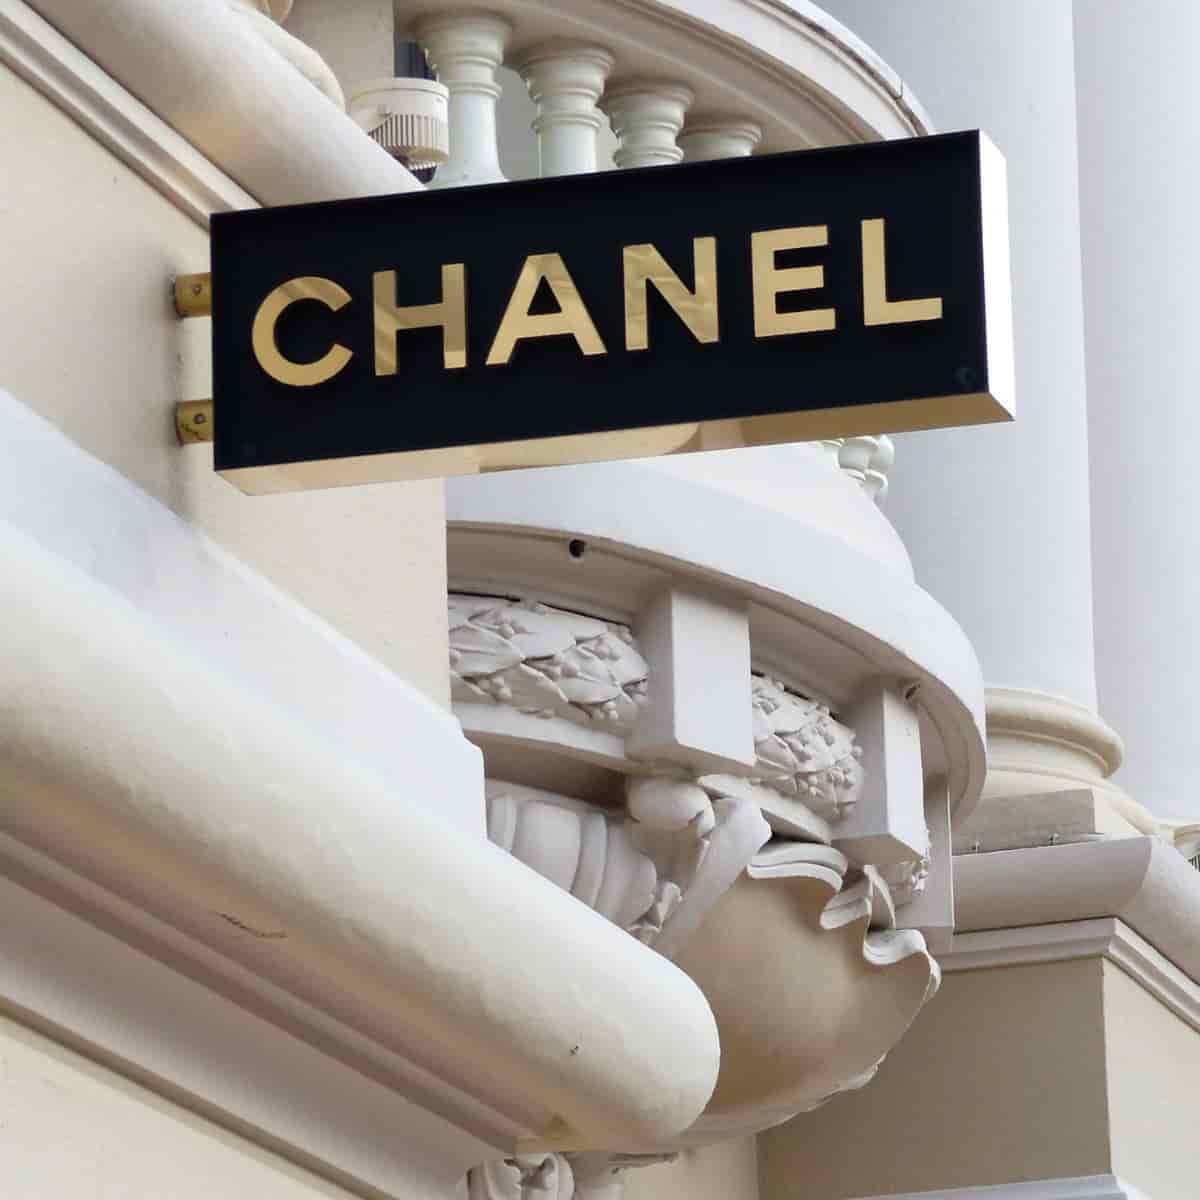 Chanel sign on a building.